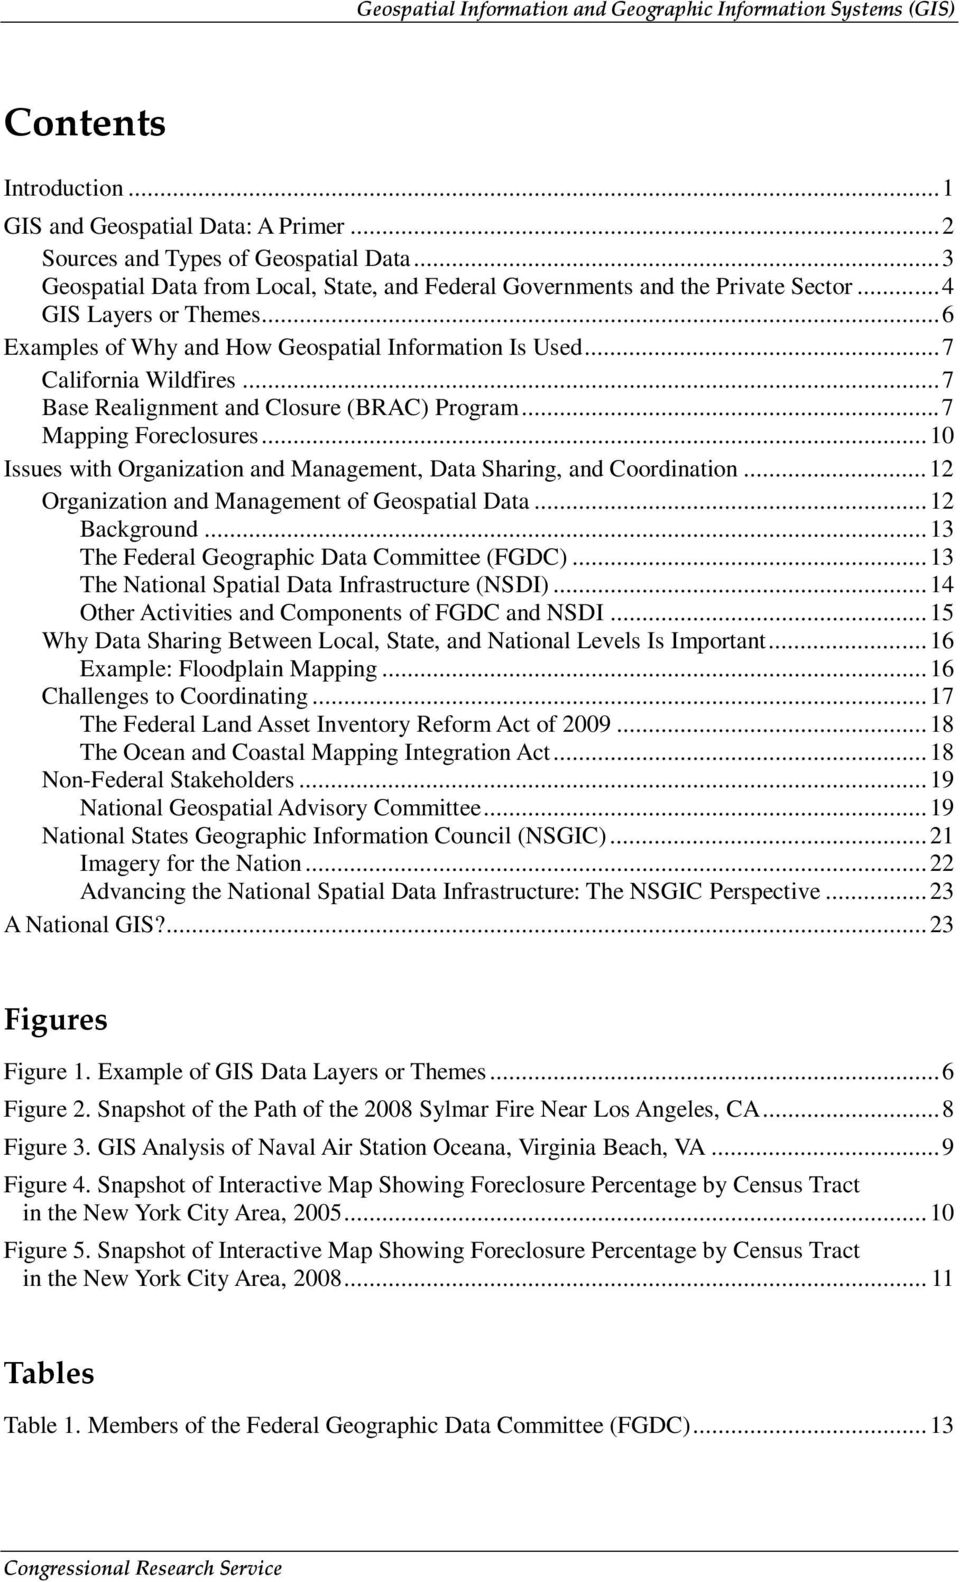 ..10 Issues with Organization and Management, Data Sharing, and Coordination...12 Organization and Management of Geospatial Data...12 Background...13 The Federal Geographic Data Committee (FGDC).